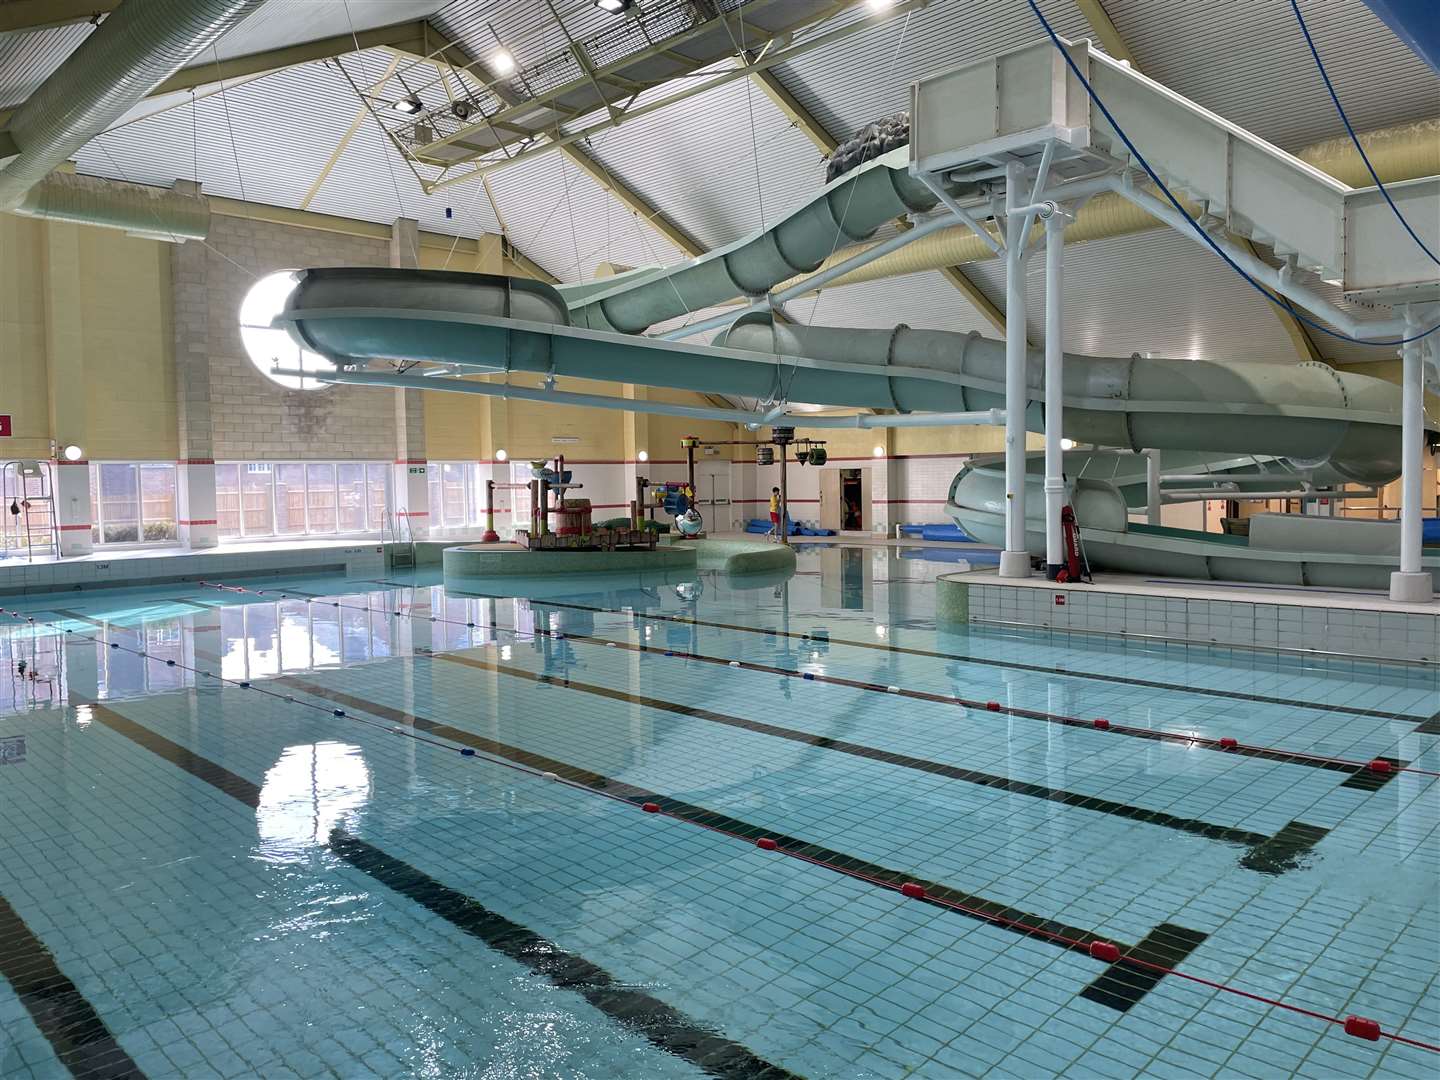 The swimming pool has faced issues for about two years